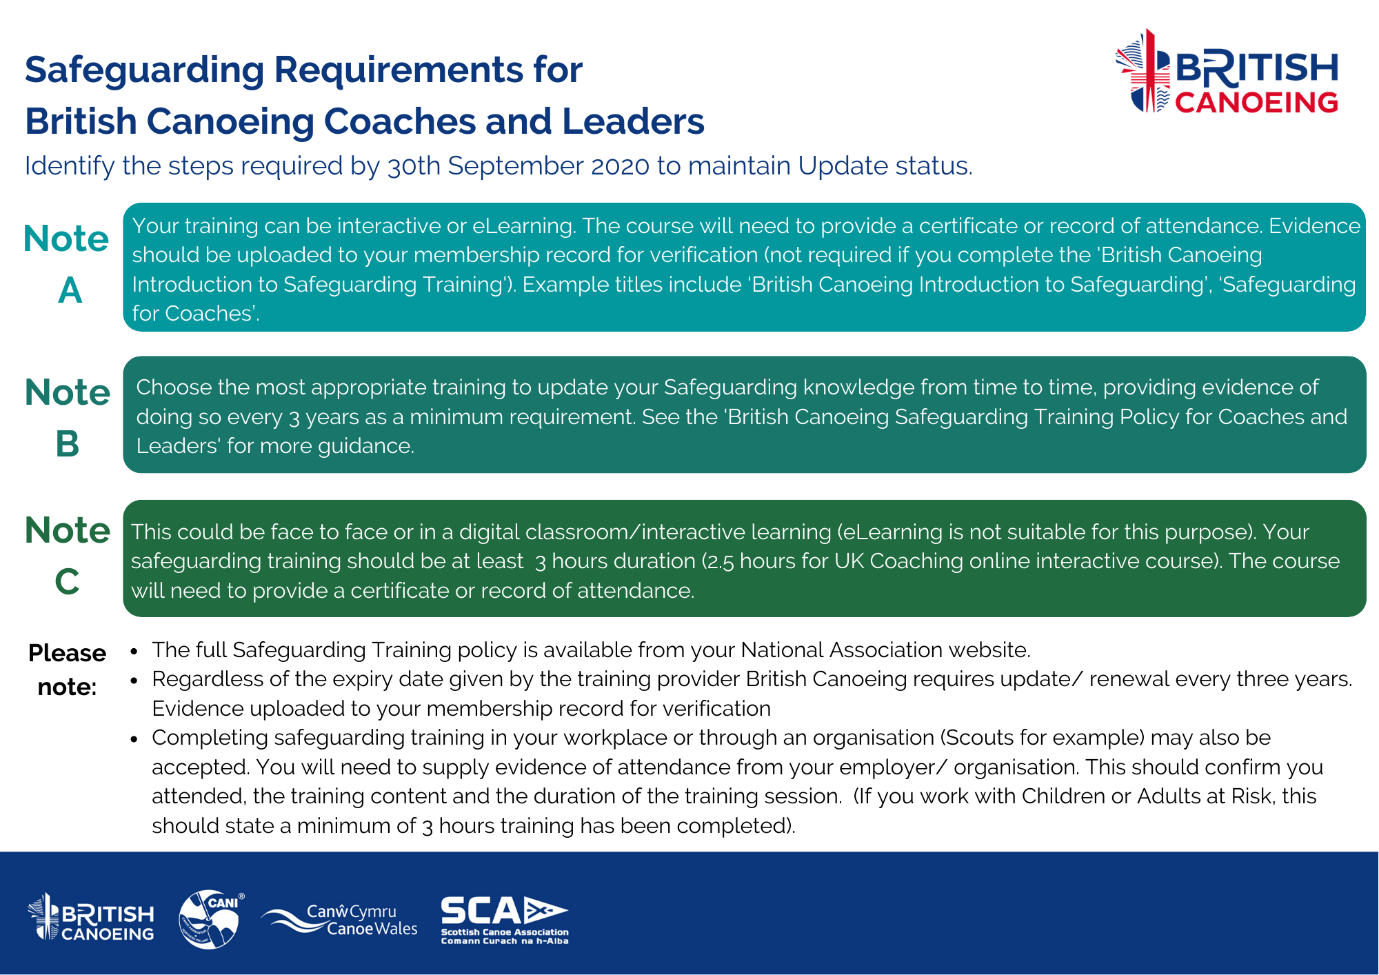 Notes on safeguarding requirements for British Canoeing coaches and leaders